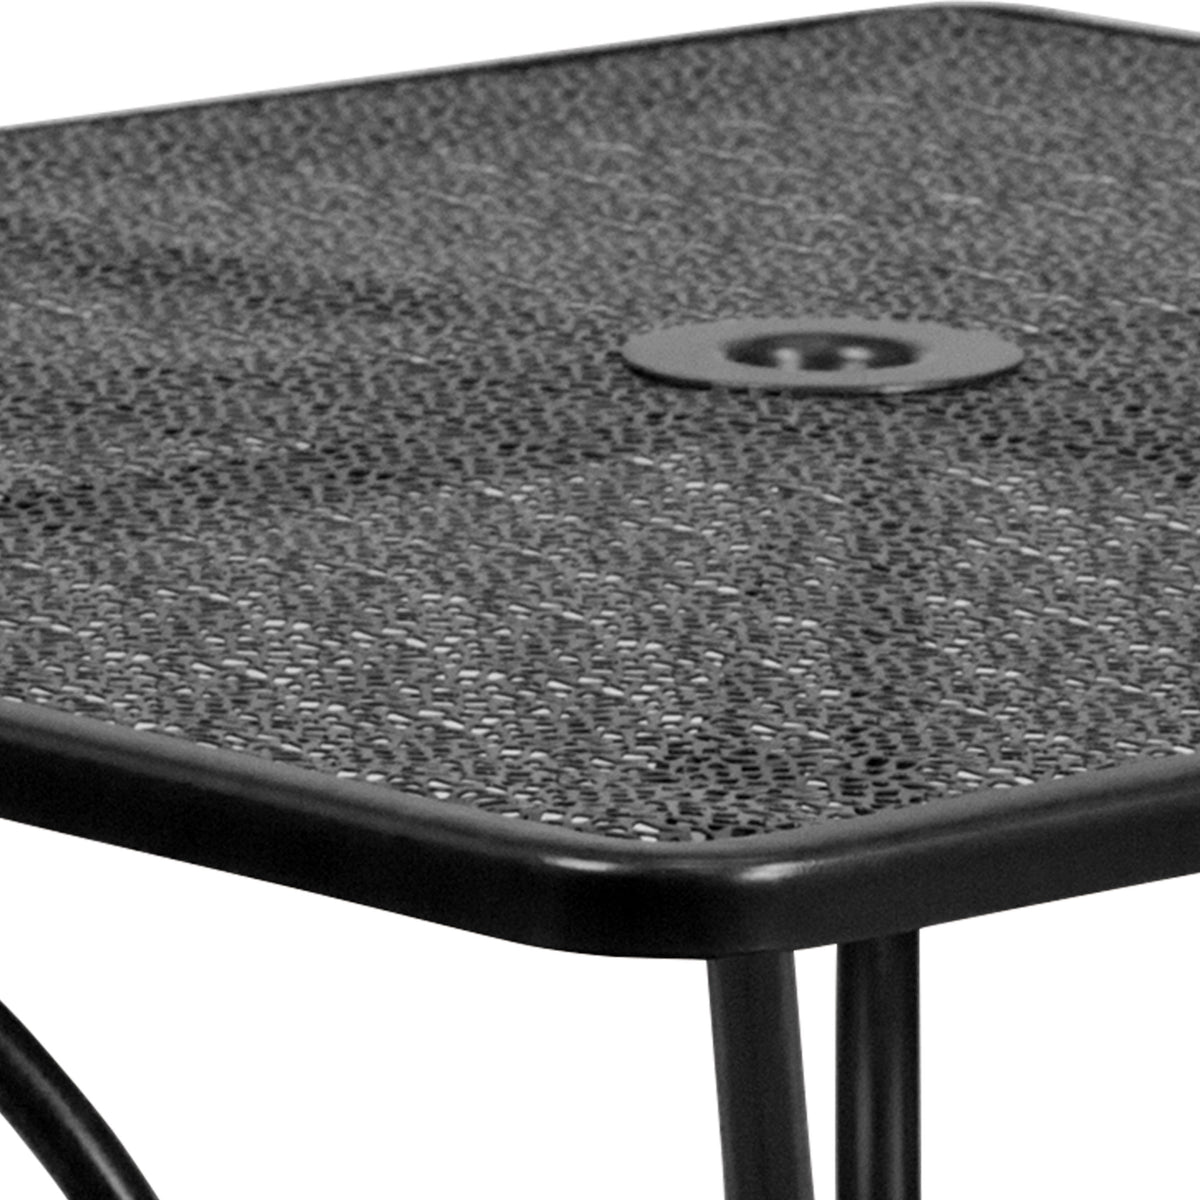 Black |#| 35.5inch Square Black Indoor-Outdoor Steel Patio Table Set w/ 4 Round Back Chairs